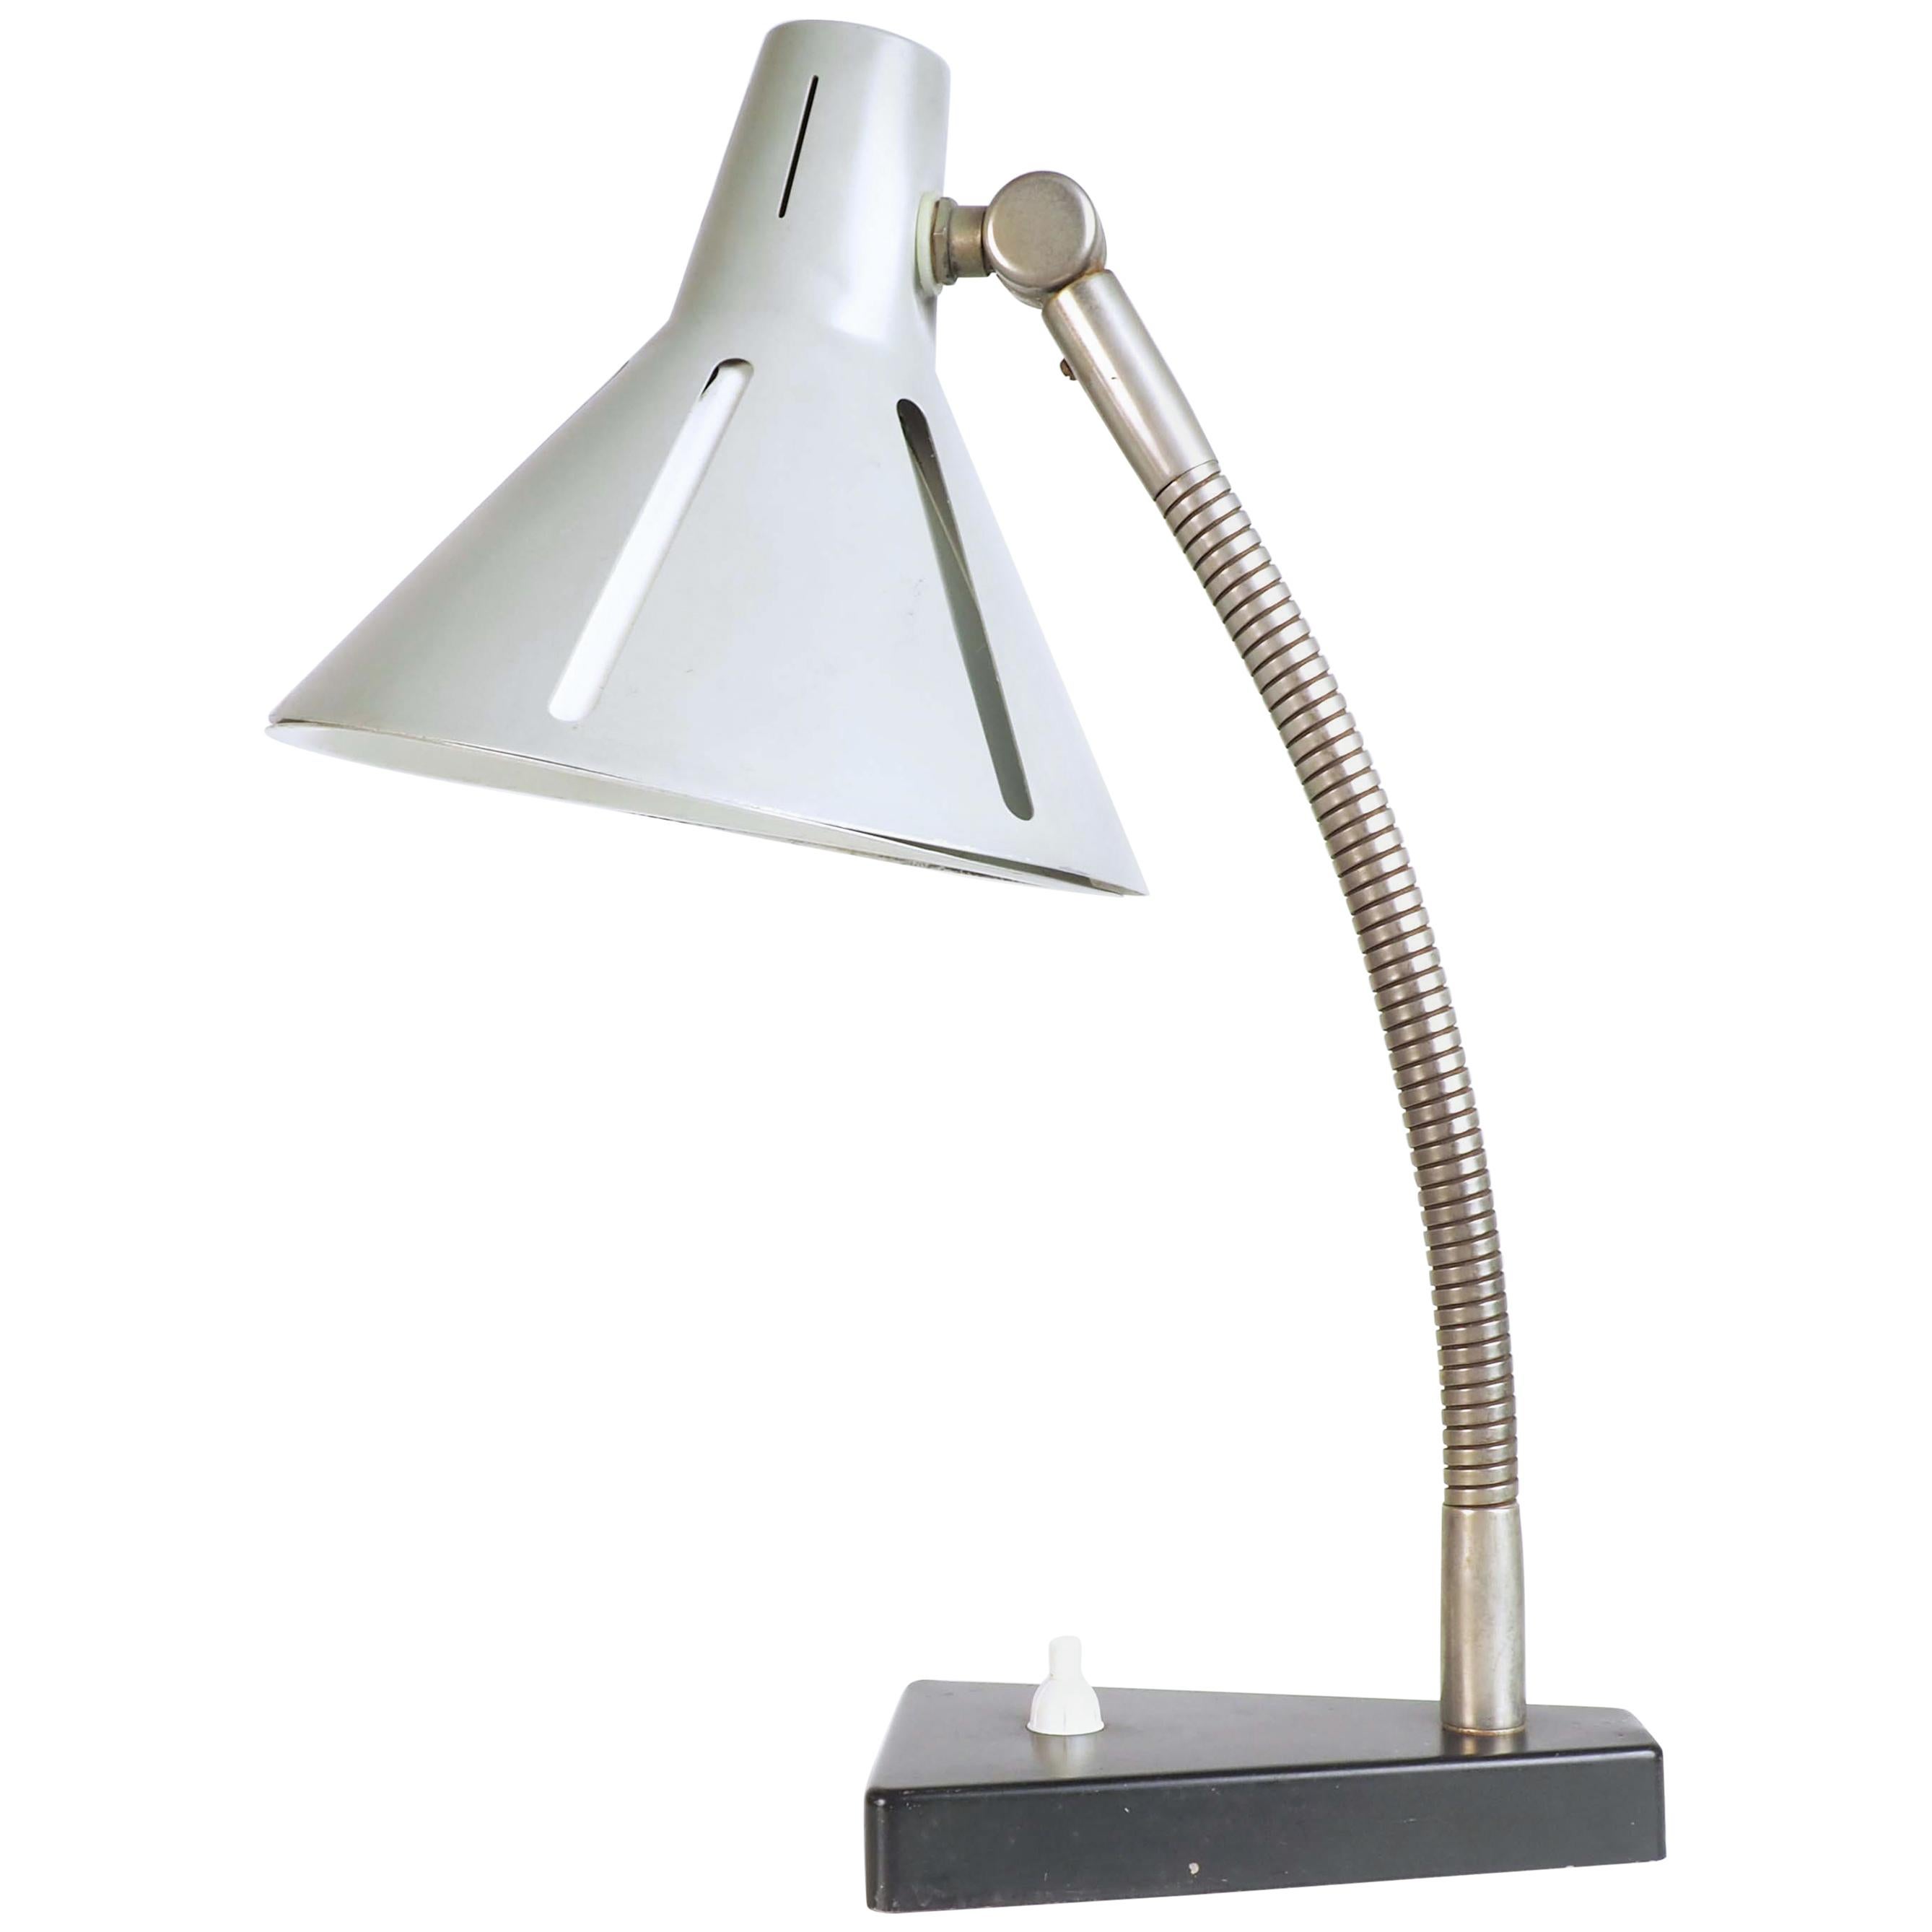 Table Lamp by H. Busquet